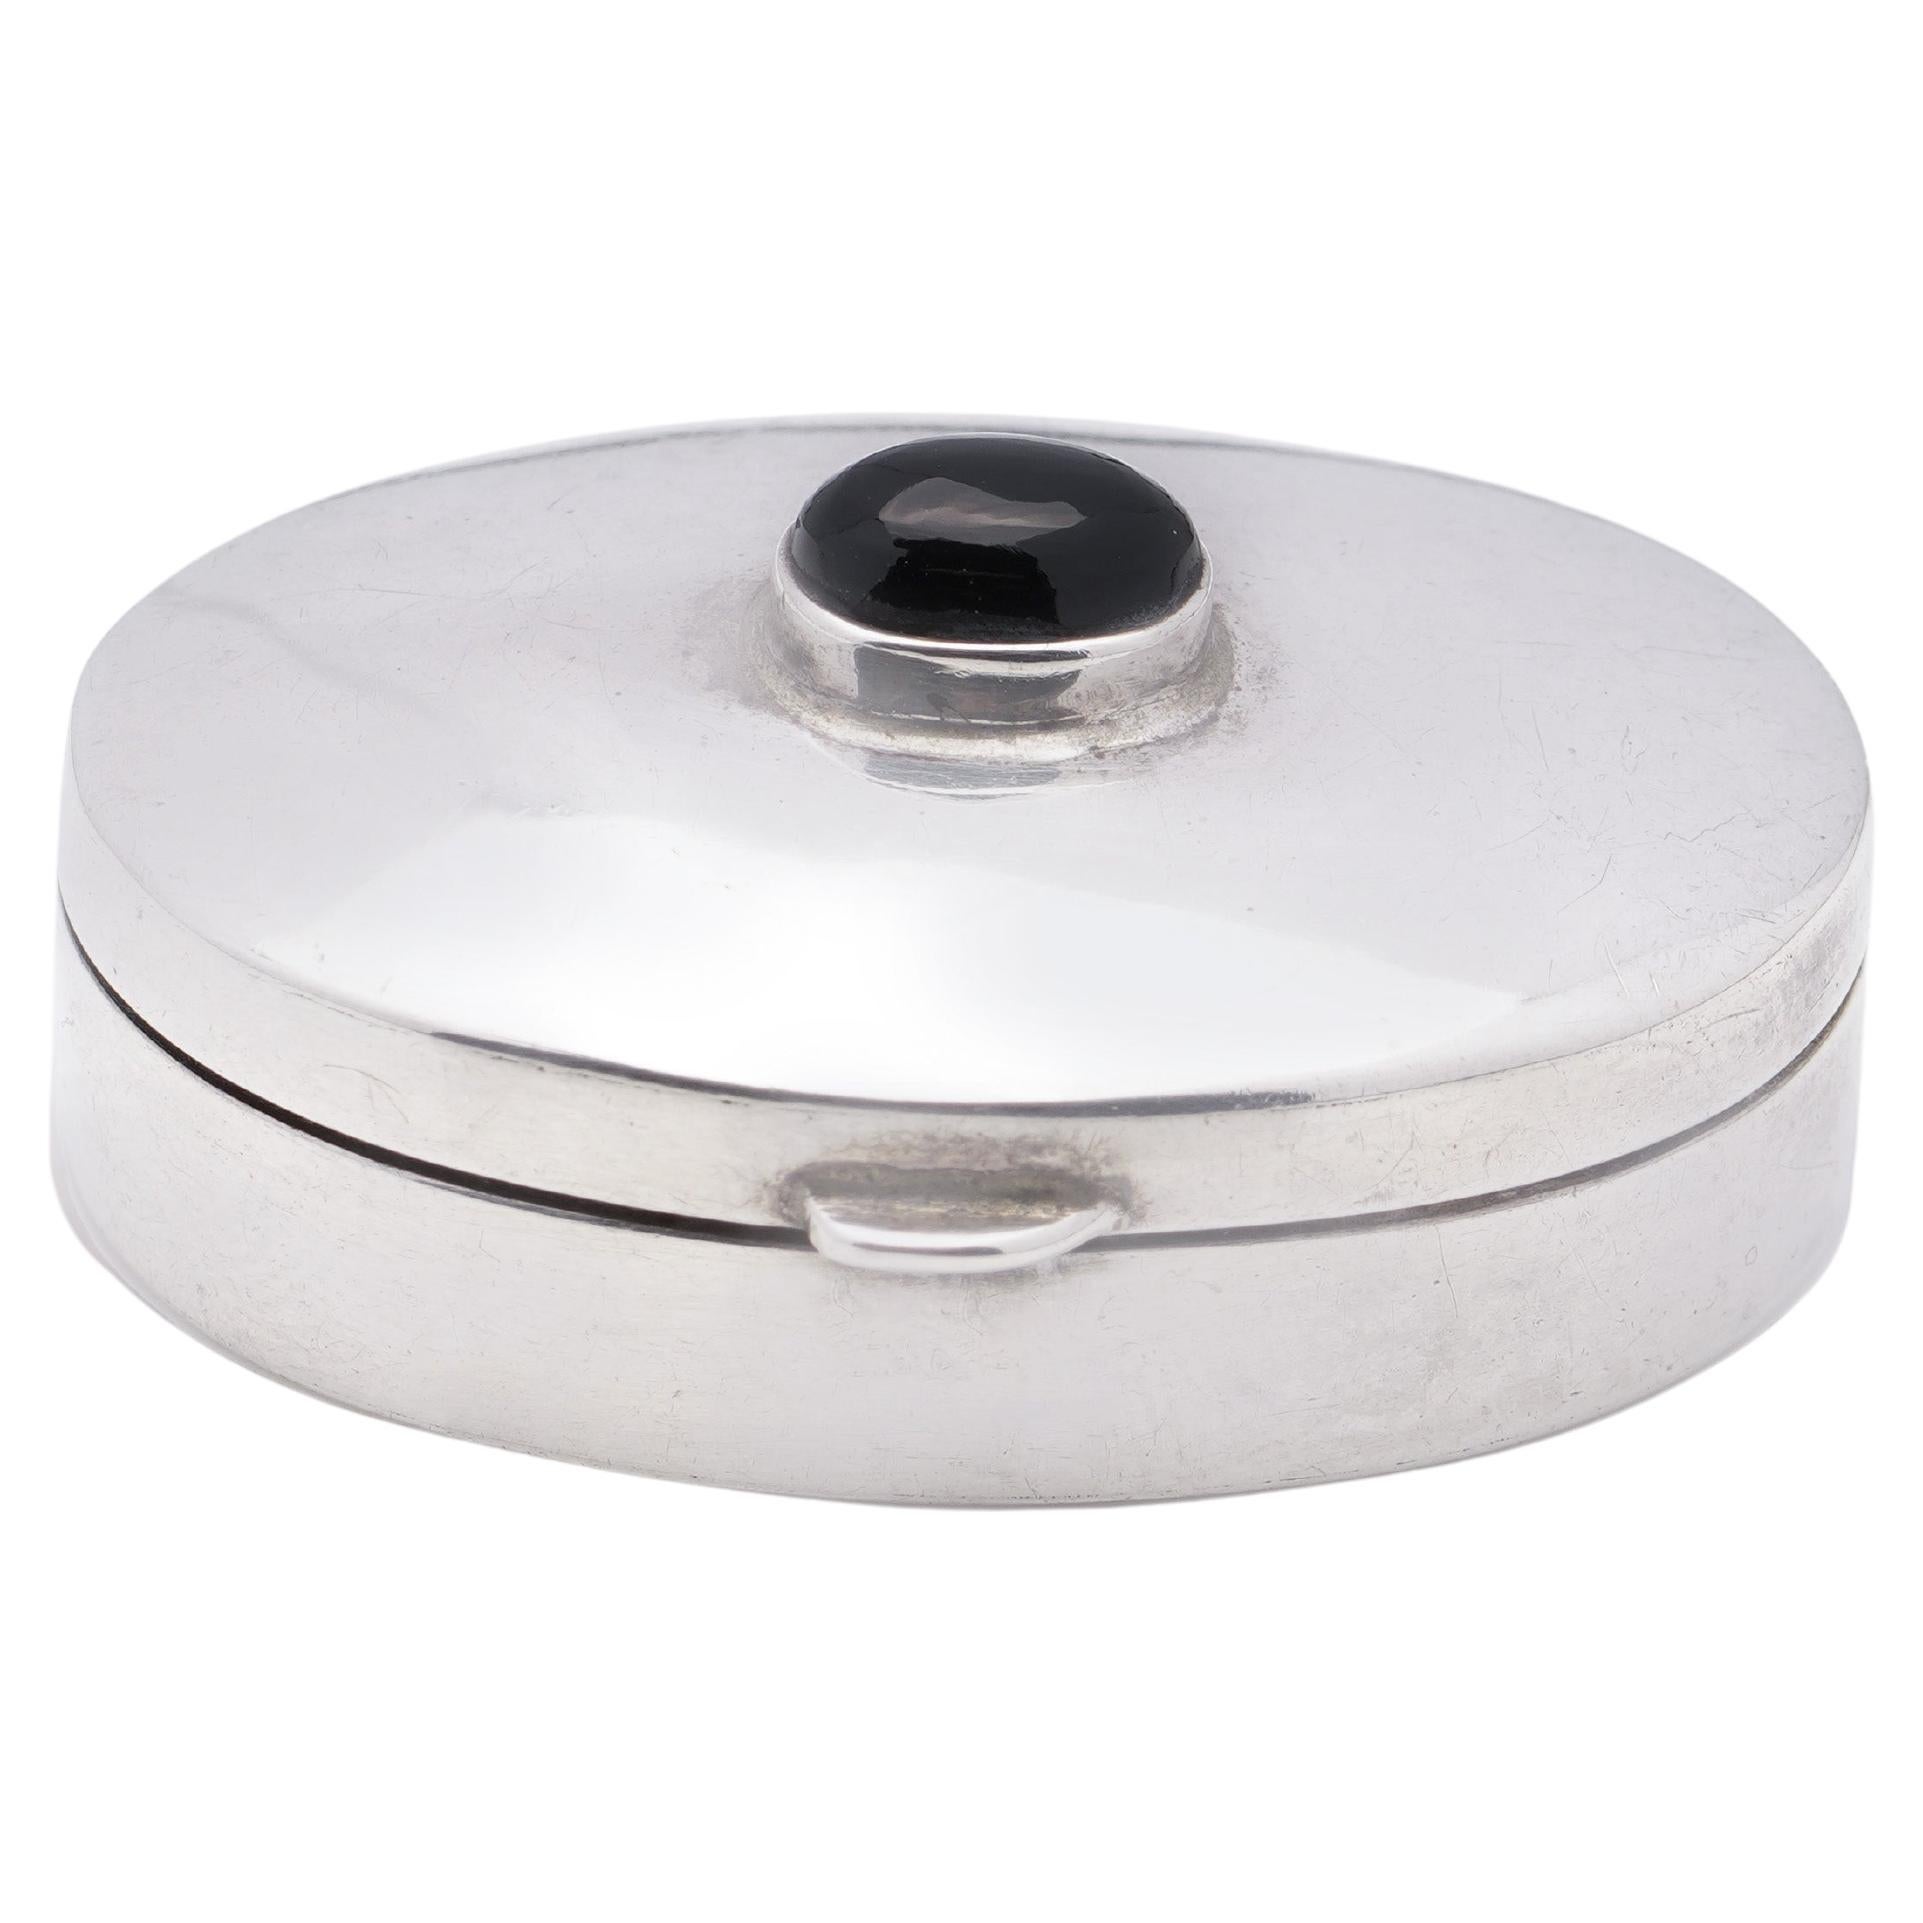 Late 20th-Century Oval-Shaped 925 silver Pillbox by Ari D Norman  For Sale